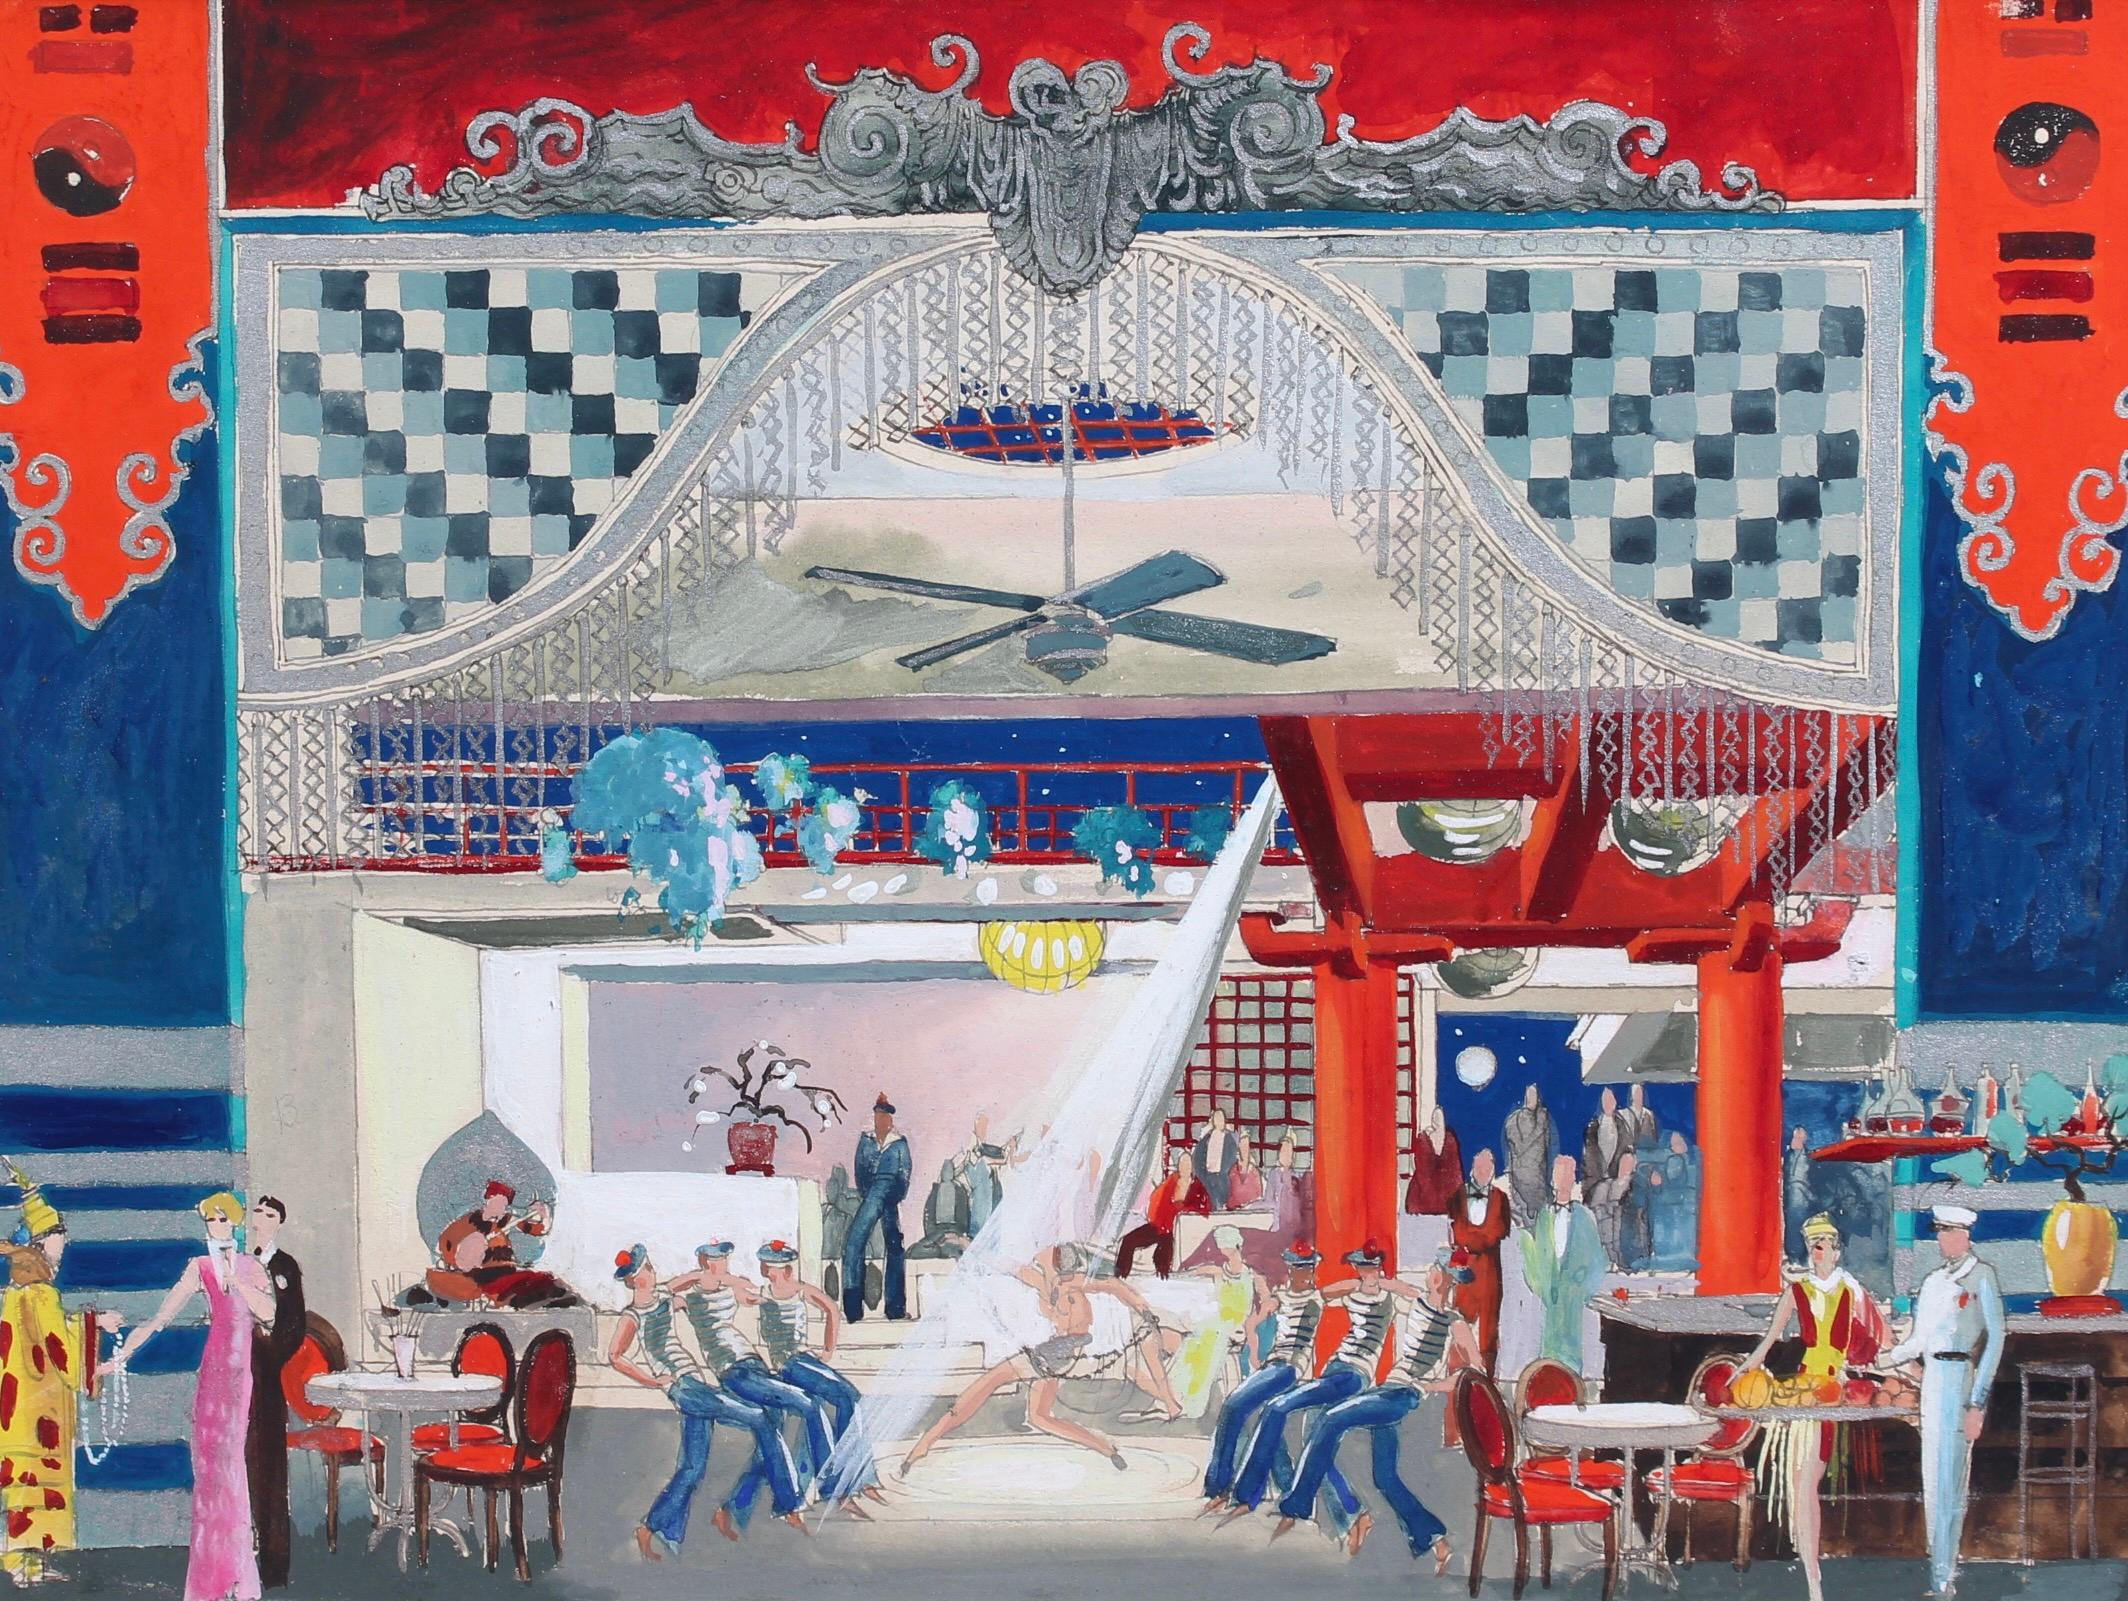 Unknown Figurative Painting - 'Cabaret in an Asian Banquet Hall', French School